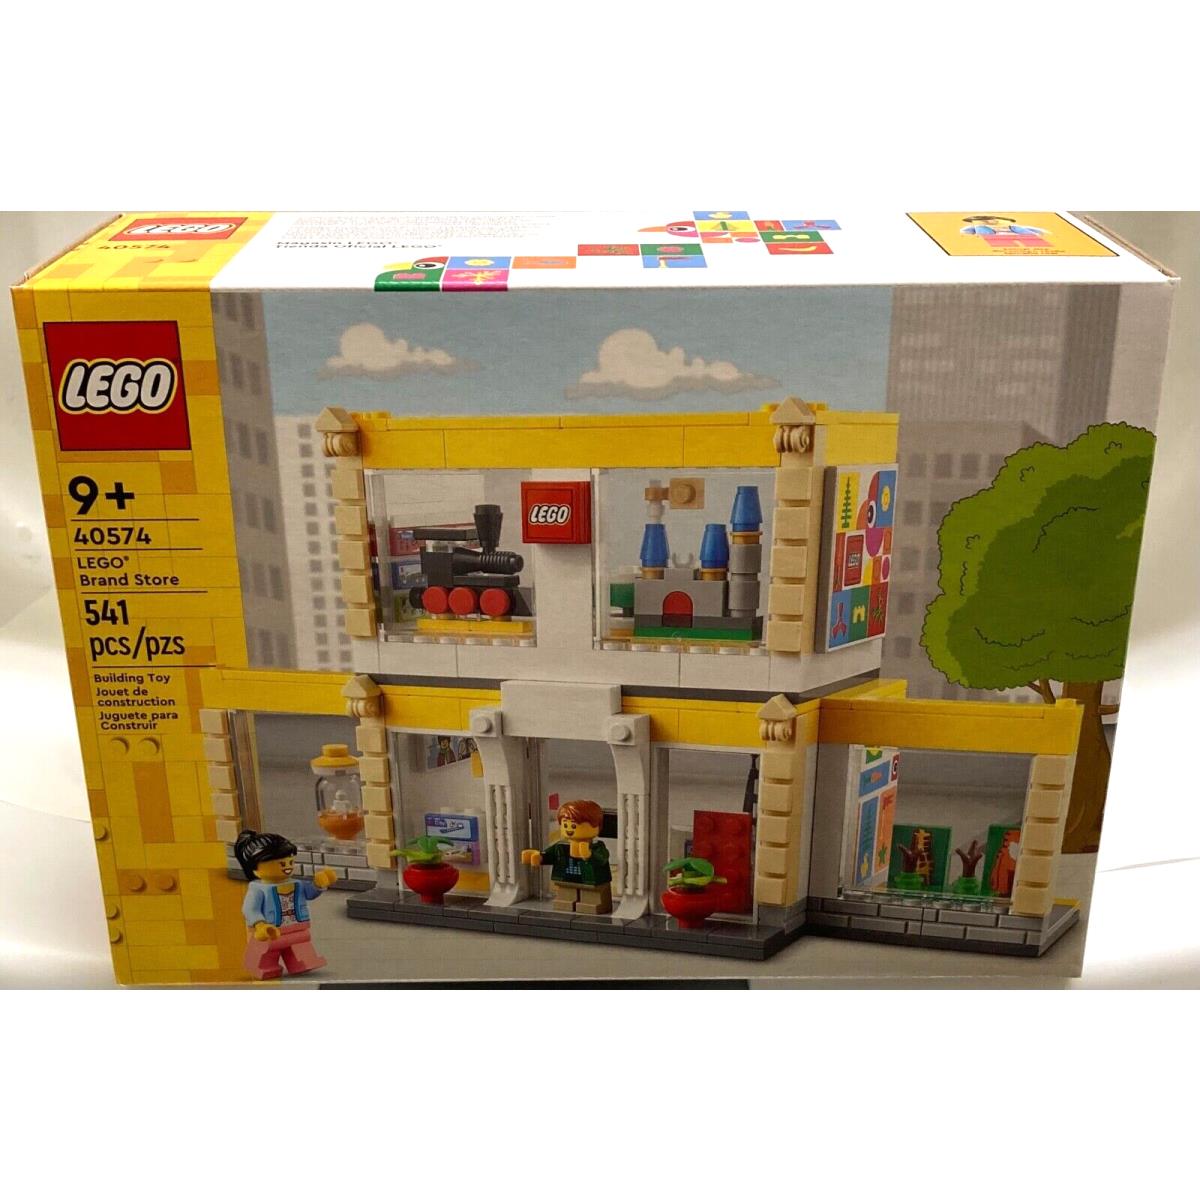 Lego Brand Store Merchandise Official Store 40574 541 Pieces Toy Set